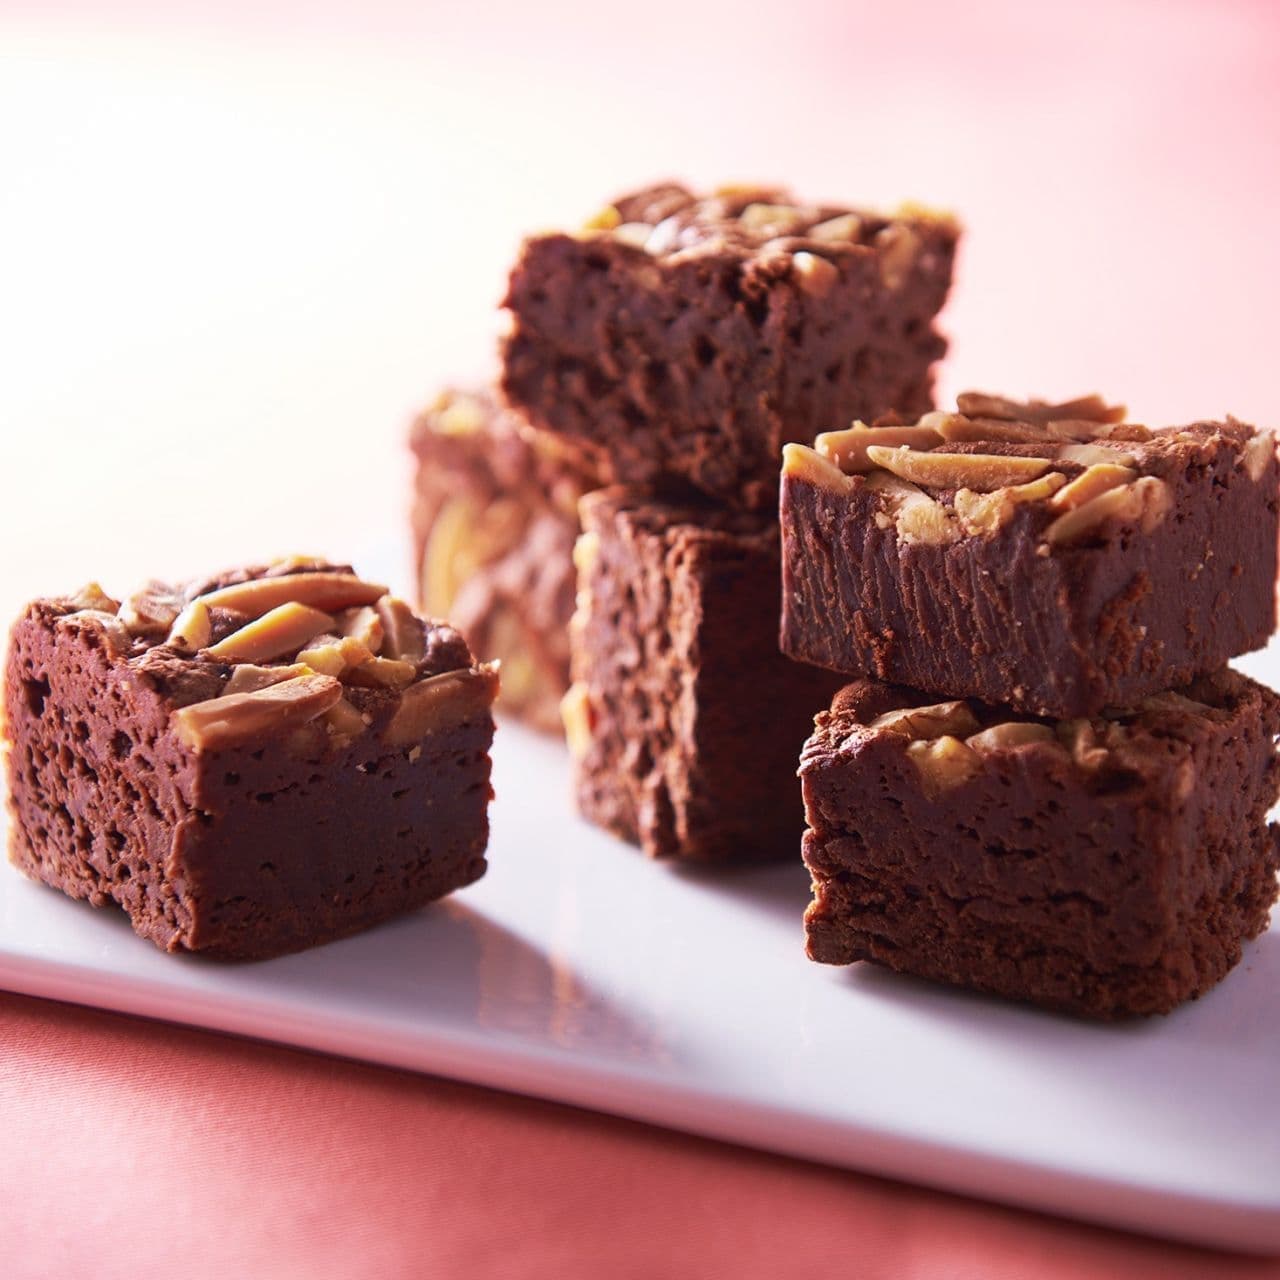 Chateraise "Brownie